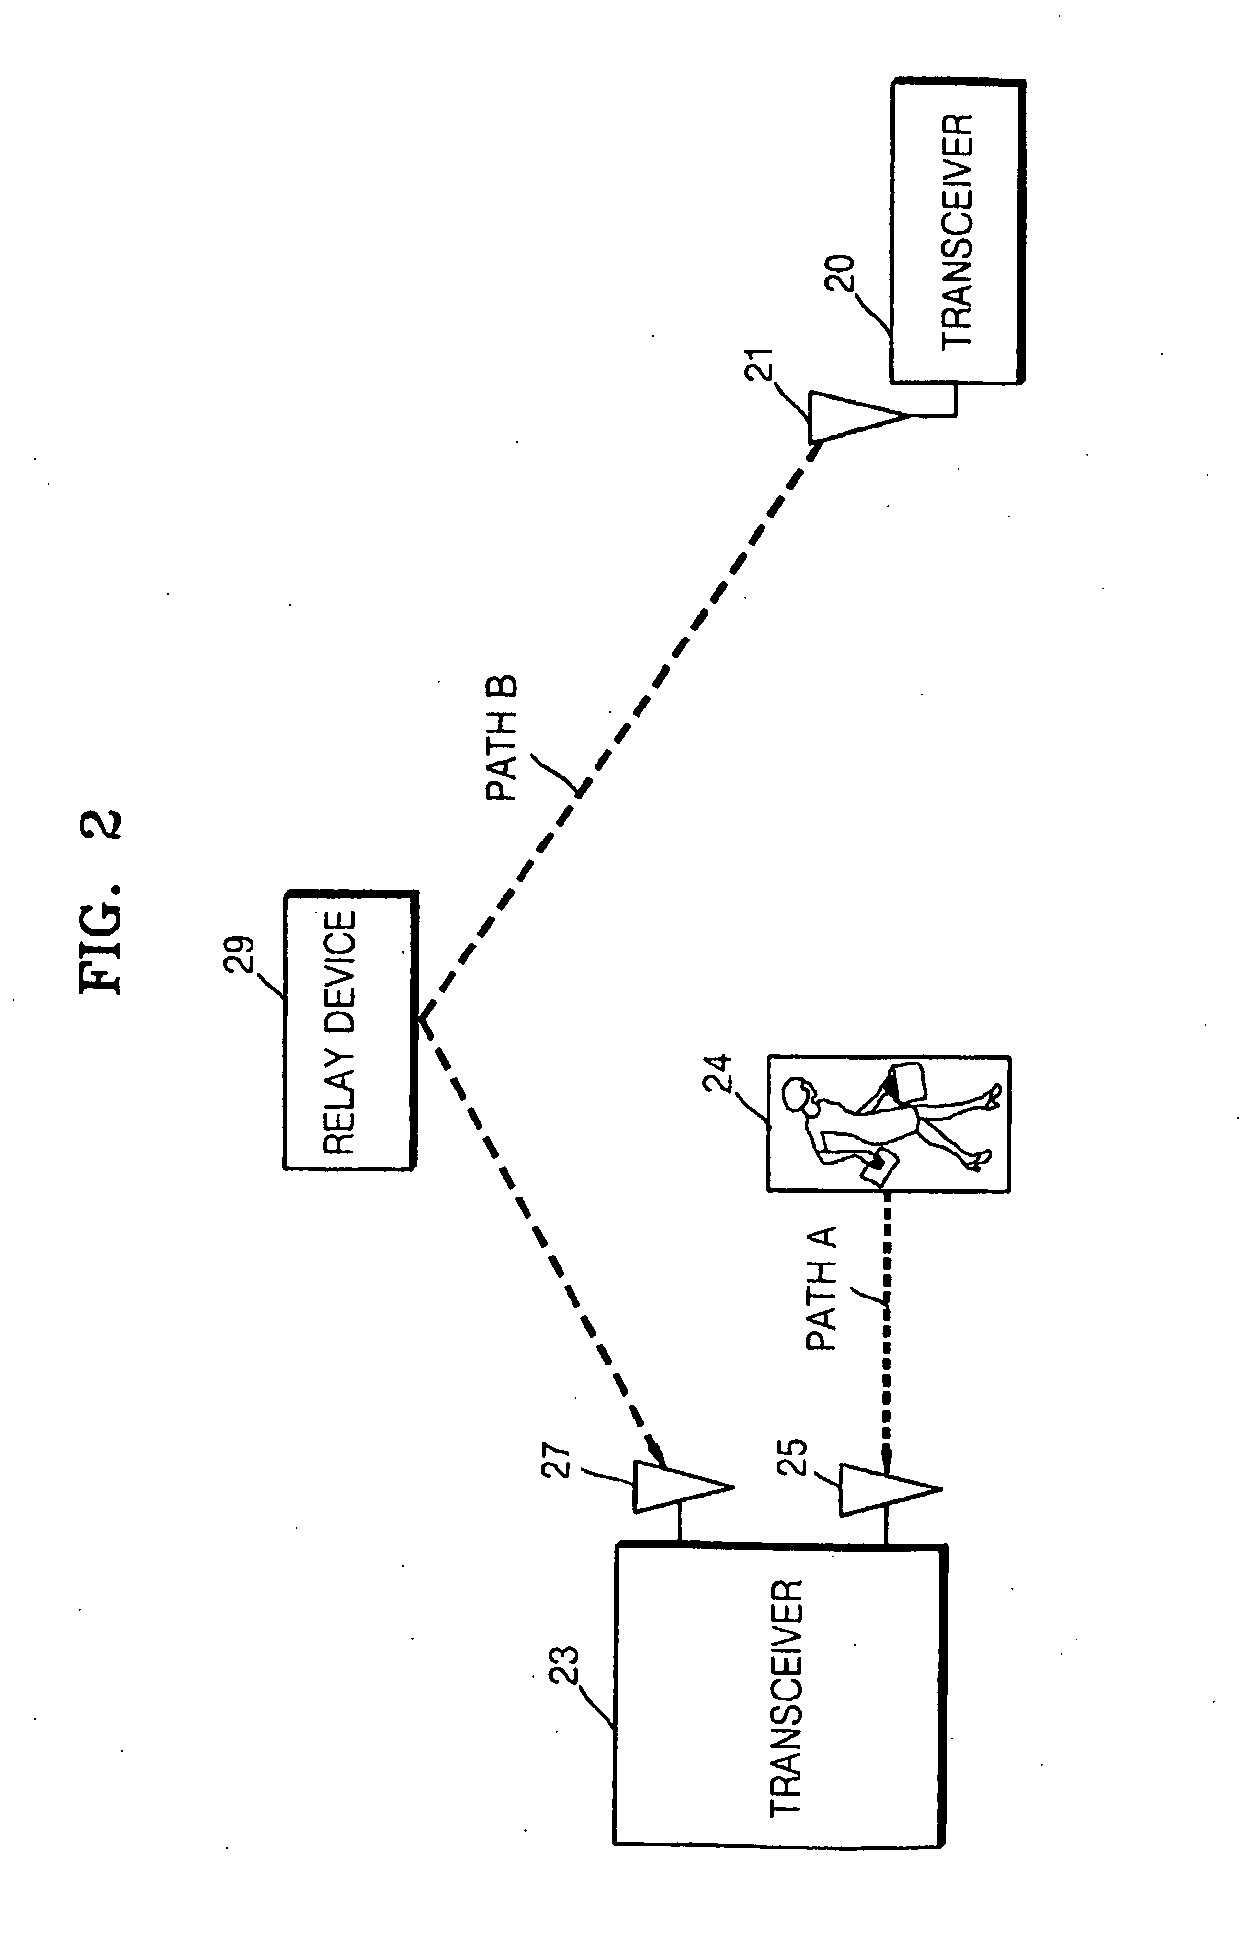 Apparatus and method of data transmission and reception using multi-path